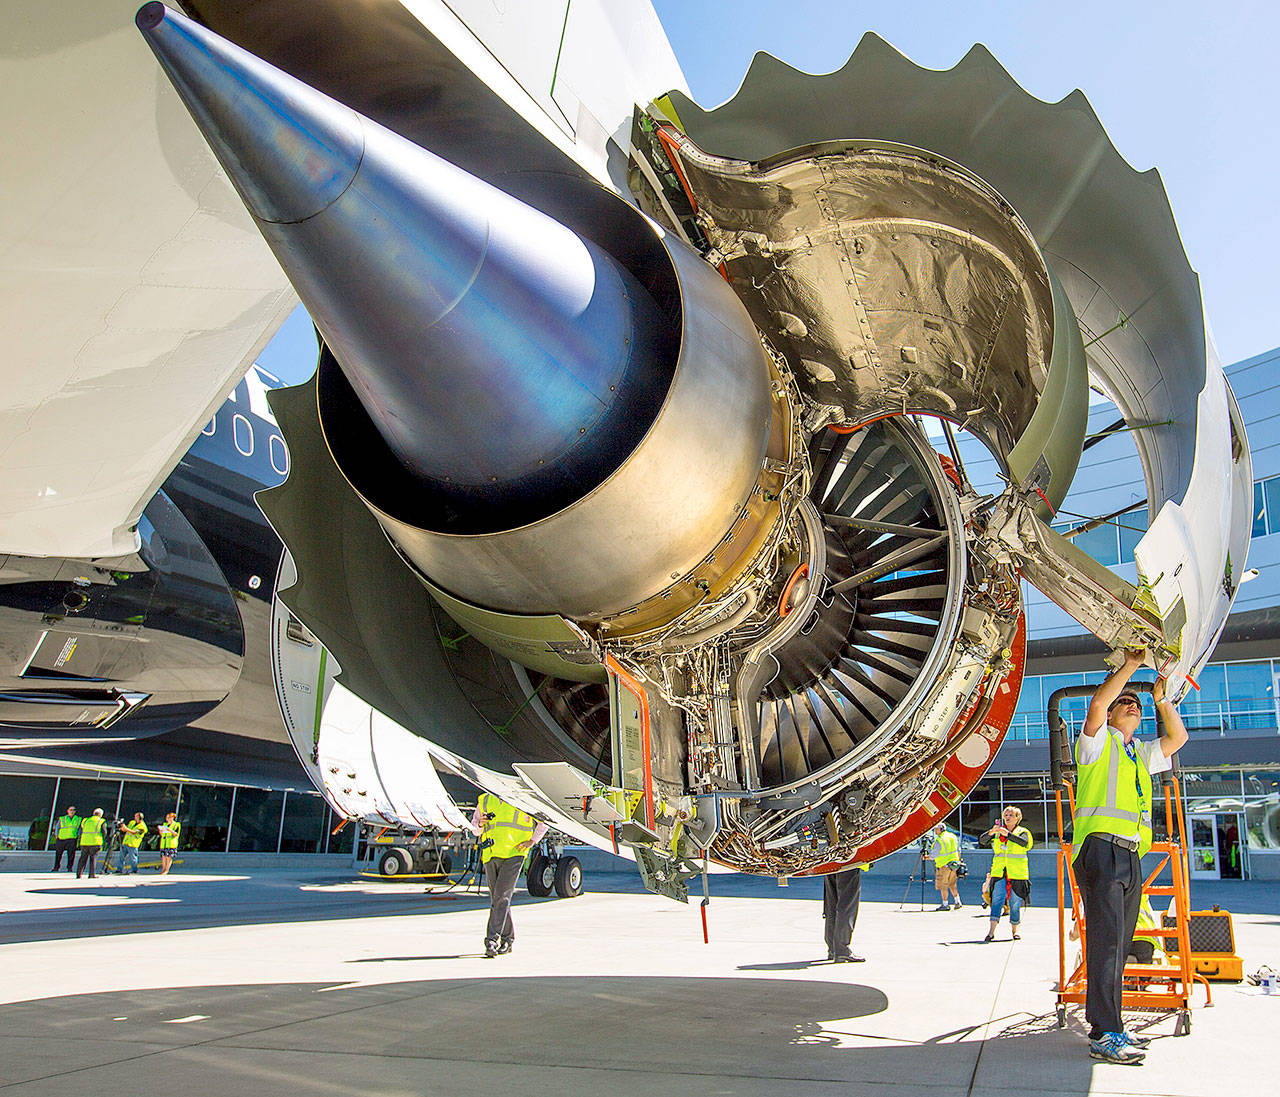 Air New Zealand and Boeing show off the first delivered 787-9 Dreamliner at Boeing’s delivery center at Paine Field in Everett in 2014. This is a Rolls-Royce Trent 1000 engine. (Mike Siegel/Seattle Times/TNS)